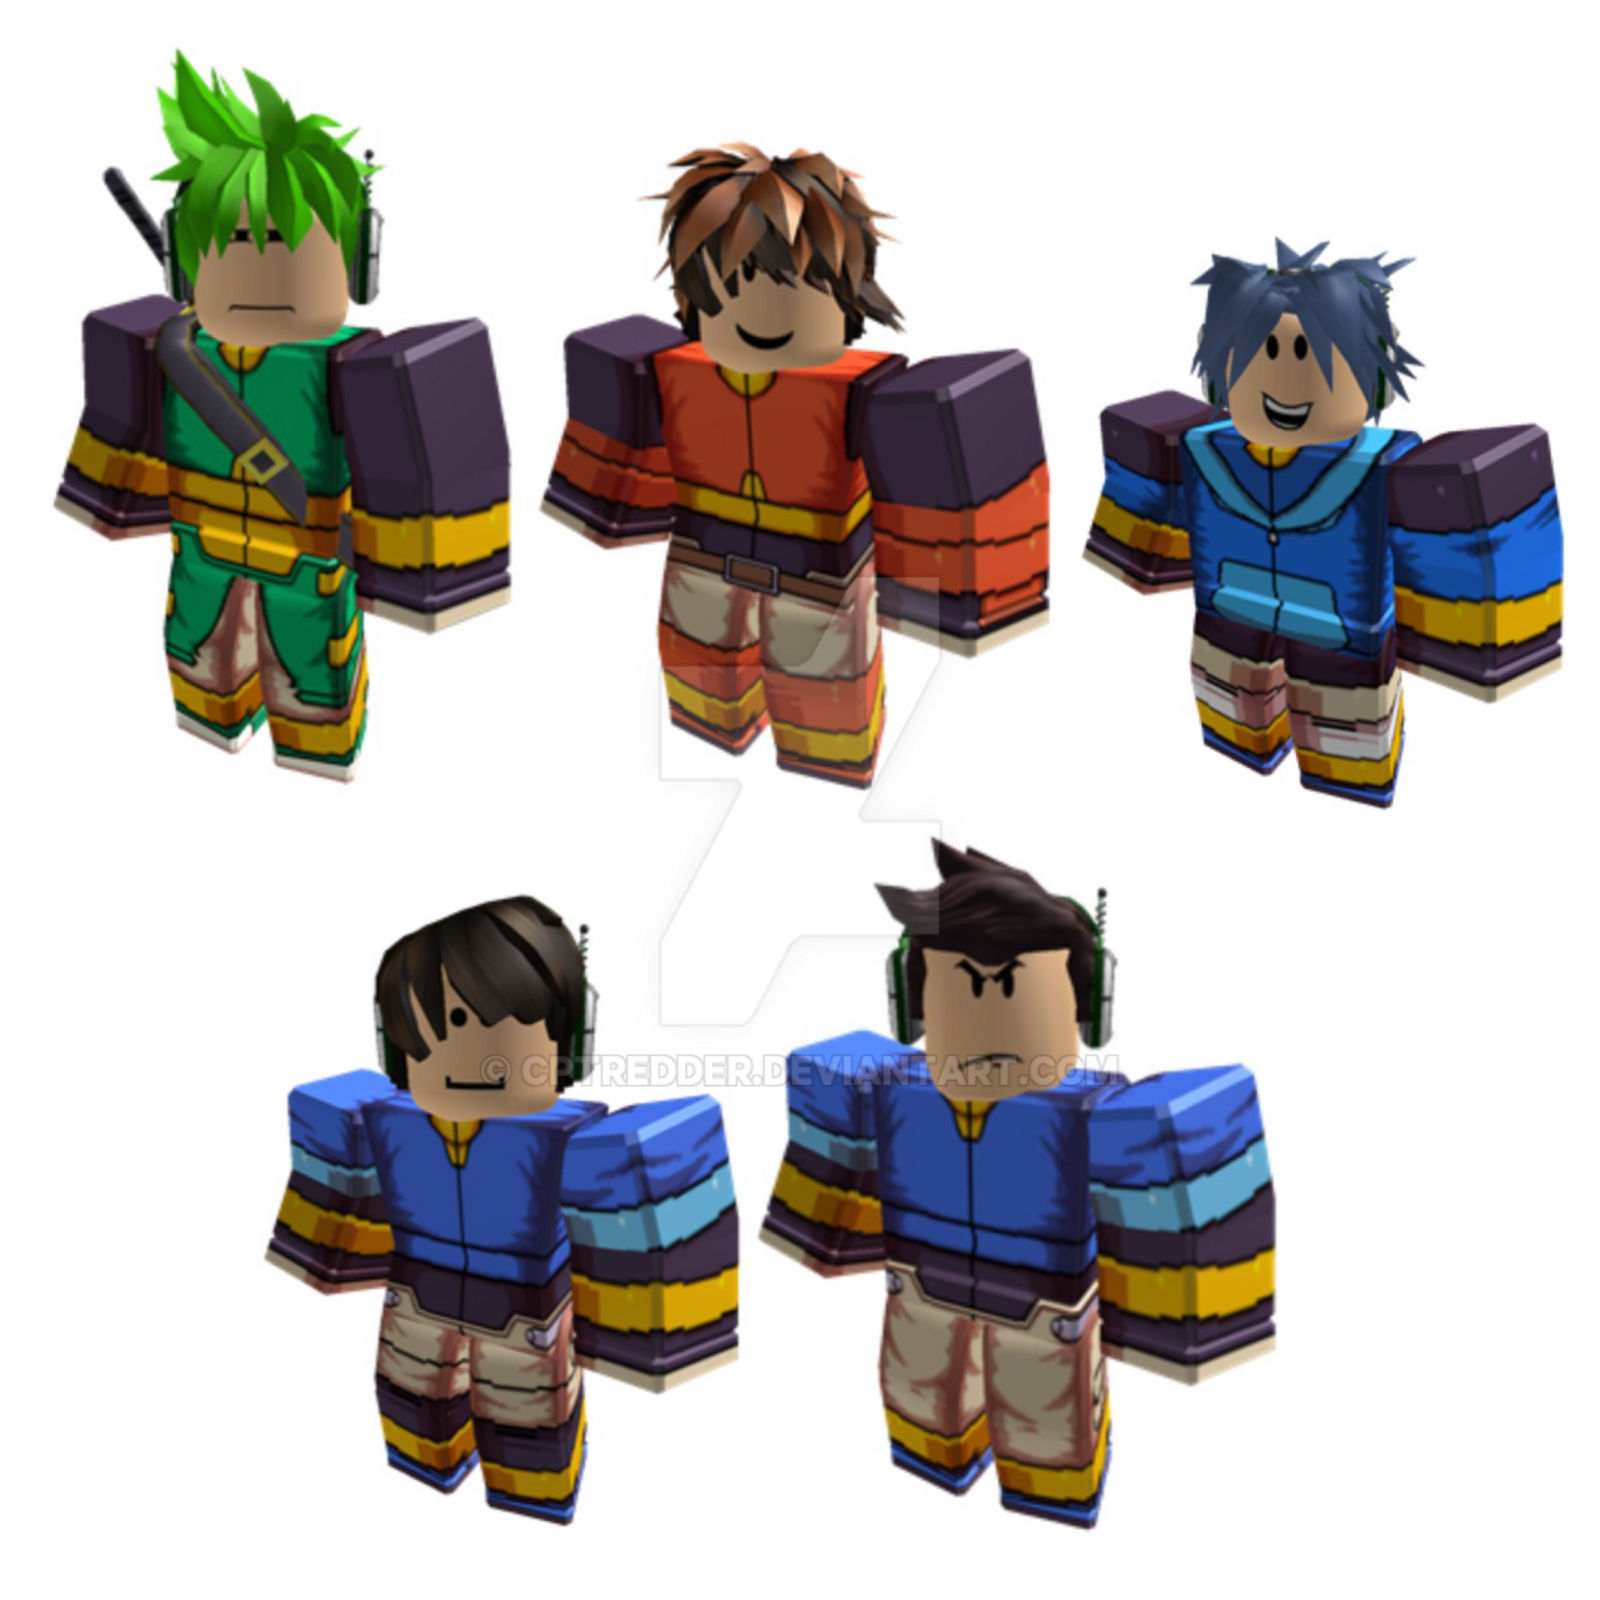 Showcasing Roblox Mmzx Outfits R15 By Cptredder On Deviantart - how to change roblox character to r15